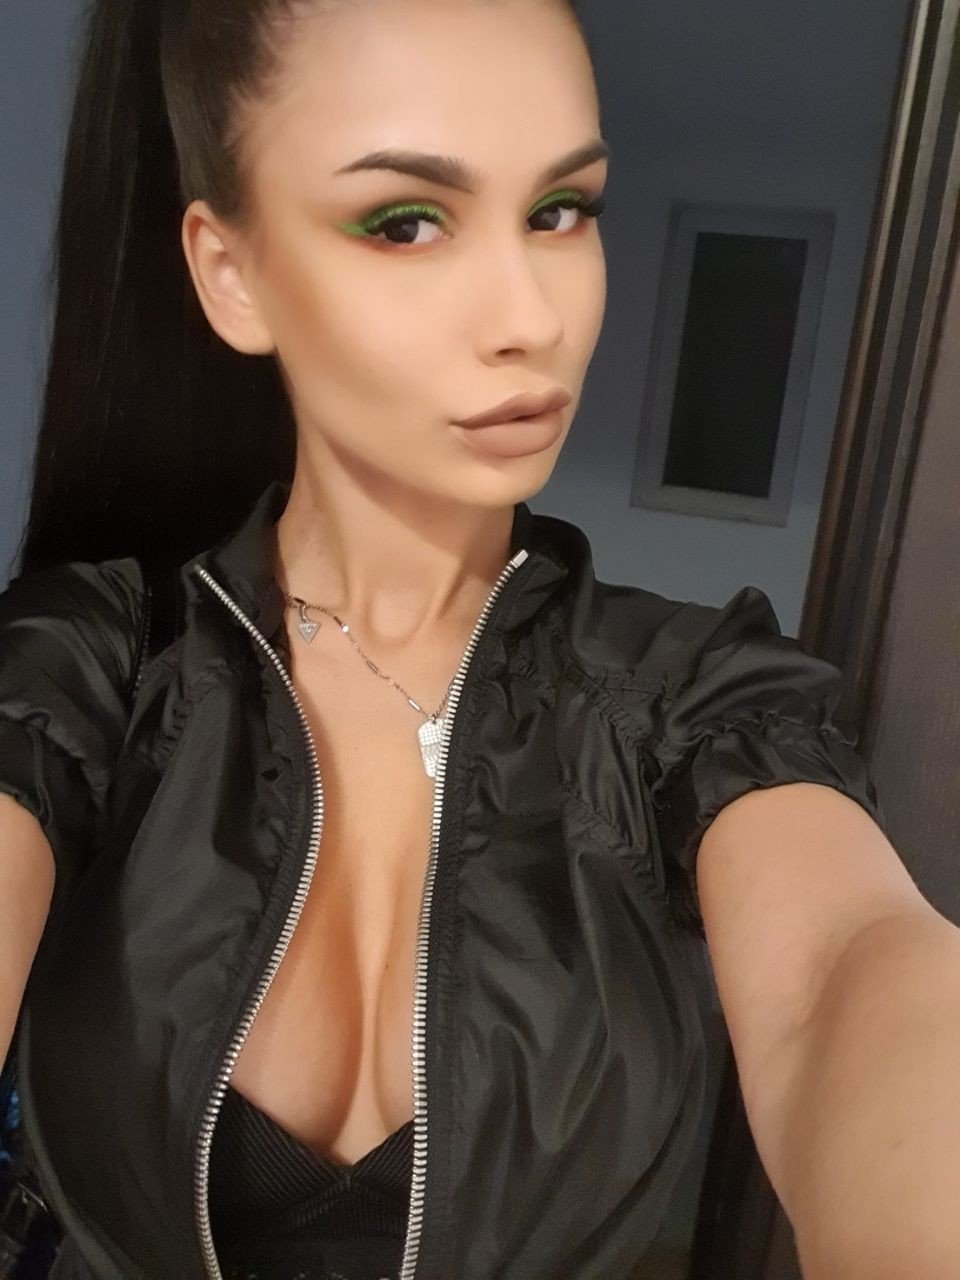 Watch the Photo by SereneSophie with the username @SereneSophie, who is a star user, posted on August 2, 2019 and the text says '#lingerie #hotbody #beautiful #sexyeyes #brunette

Sexy black outfit and neon green touches⁉ Yeah baby it's #Friday💥Be naughty and let's have some👉👌fun today on&on @ https://bit.ly/SereneSophie💦'